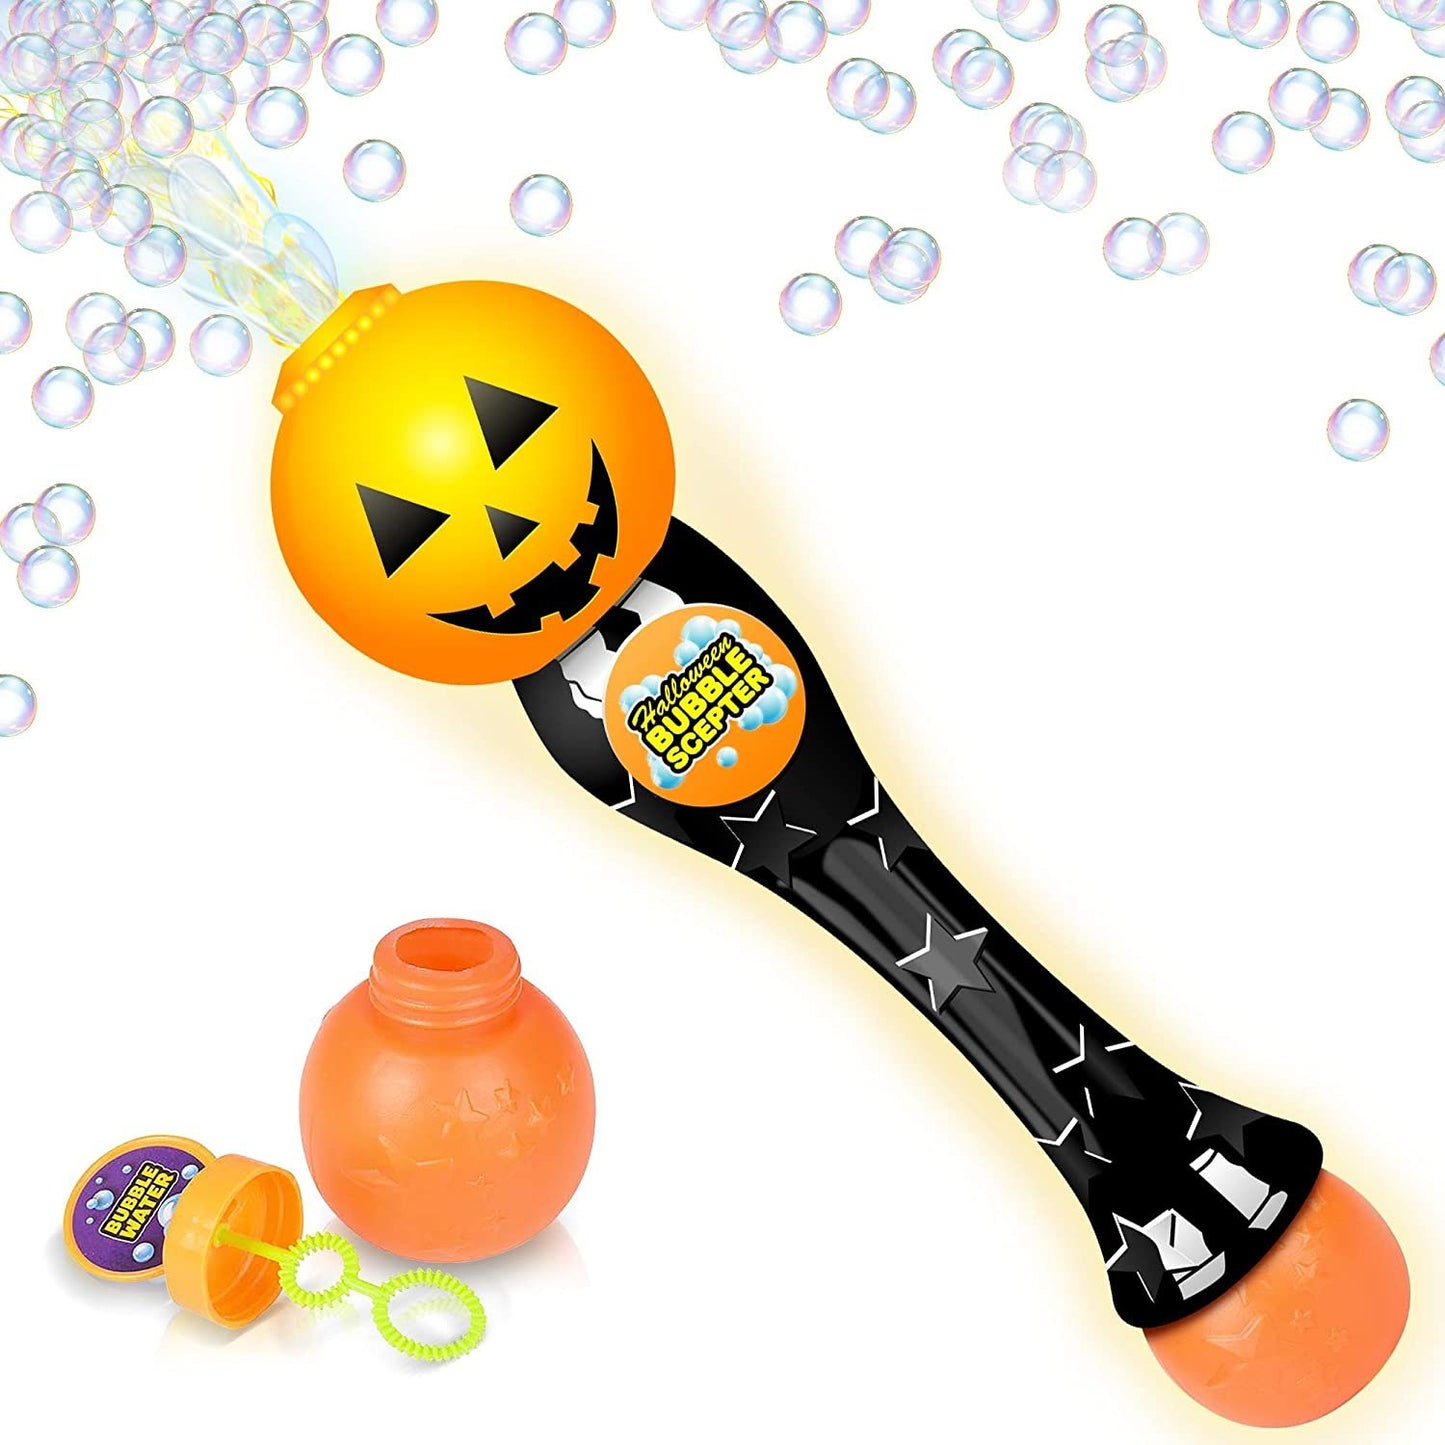 ArtCreativity Light Up Pumpkin Bubble Blower Wand - 13.5 Inch Illuminating Bubble Blower Wand with Thrilling LED Effect for Kids, Bubble Fluid - Batteries Included - Gift Idea, Halloween Party Favor